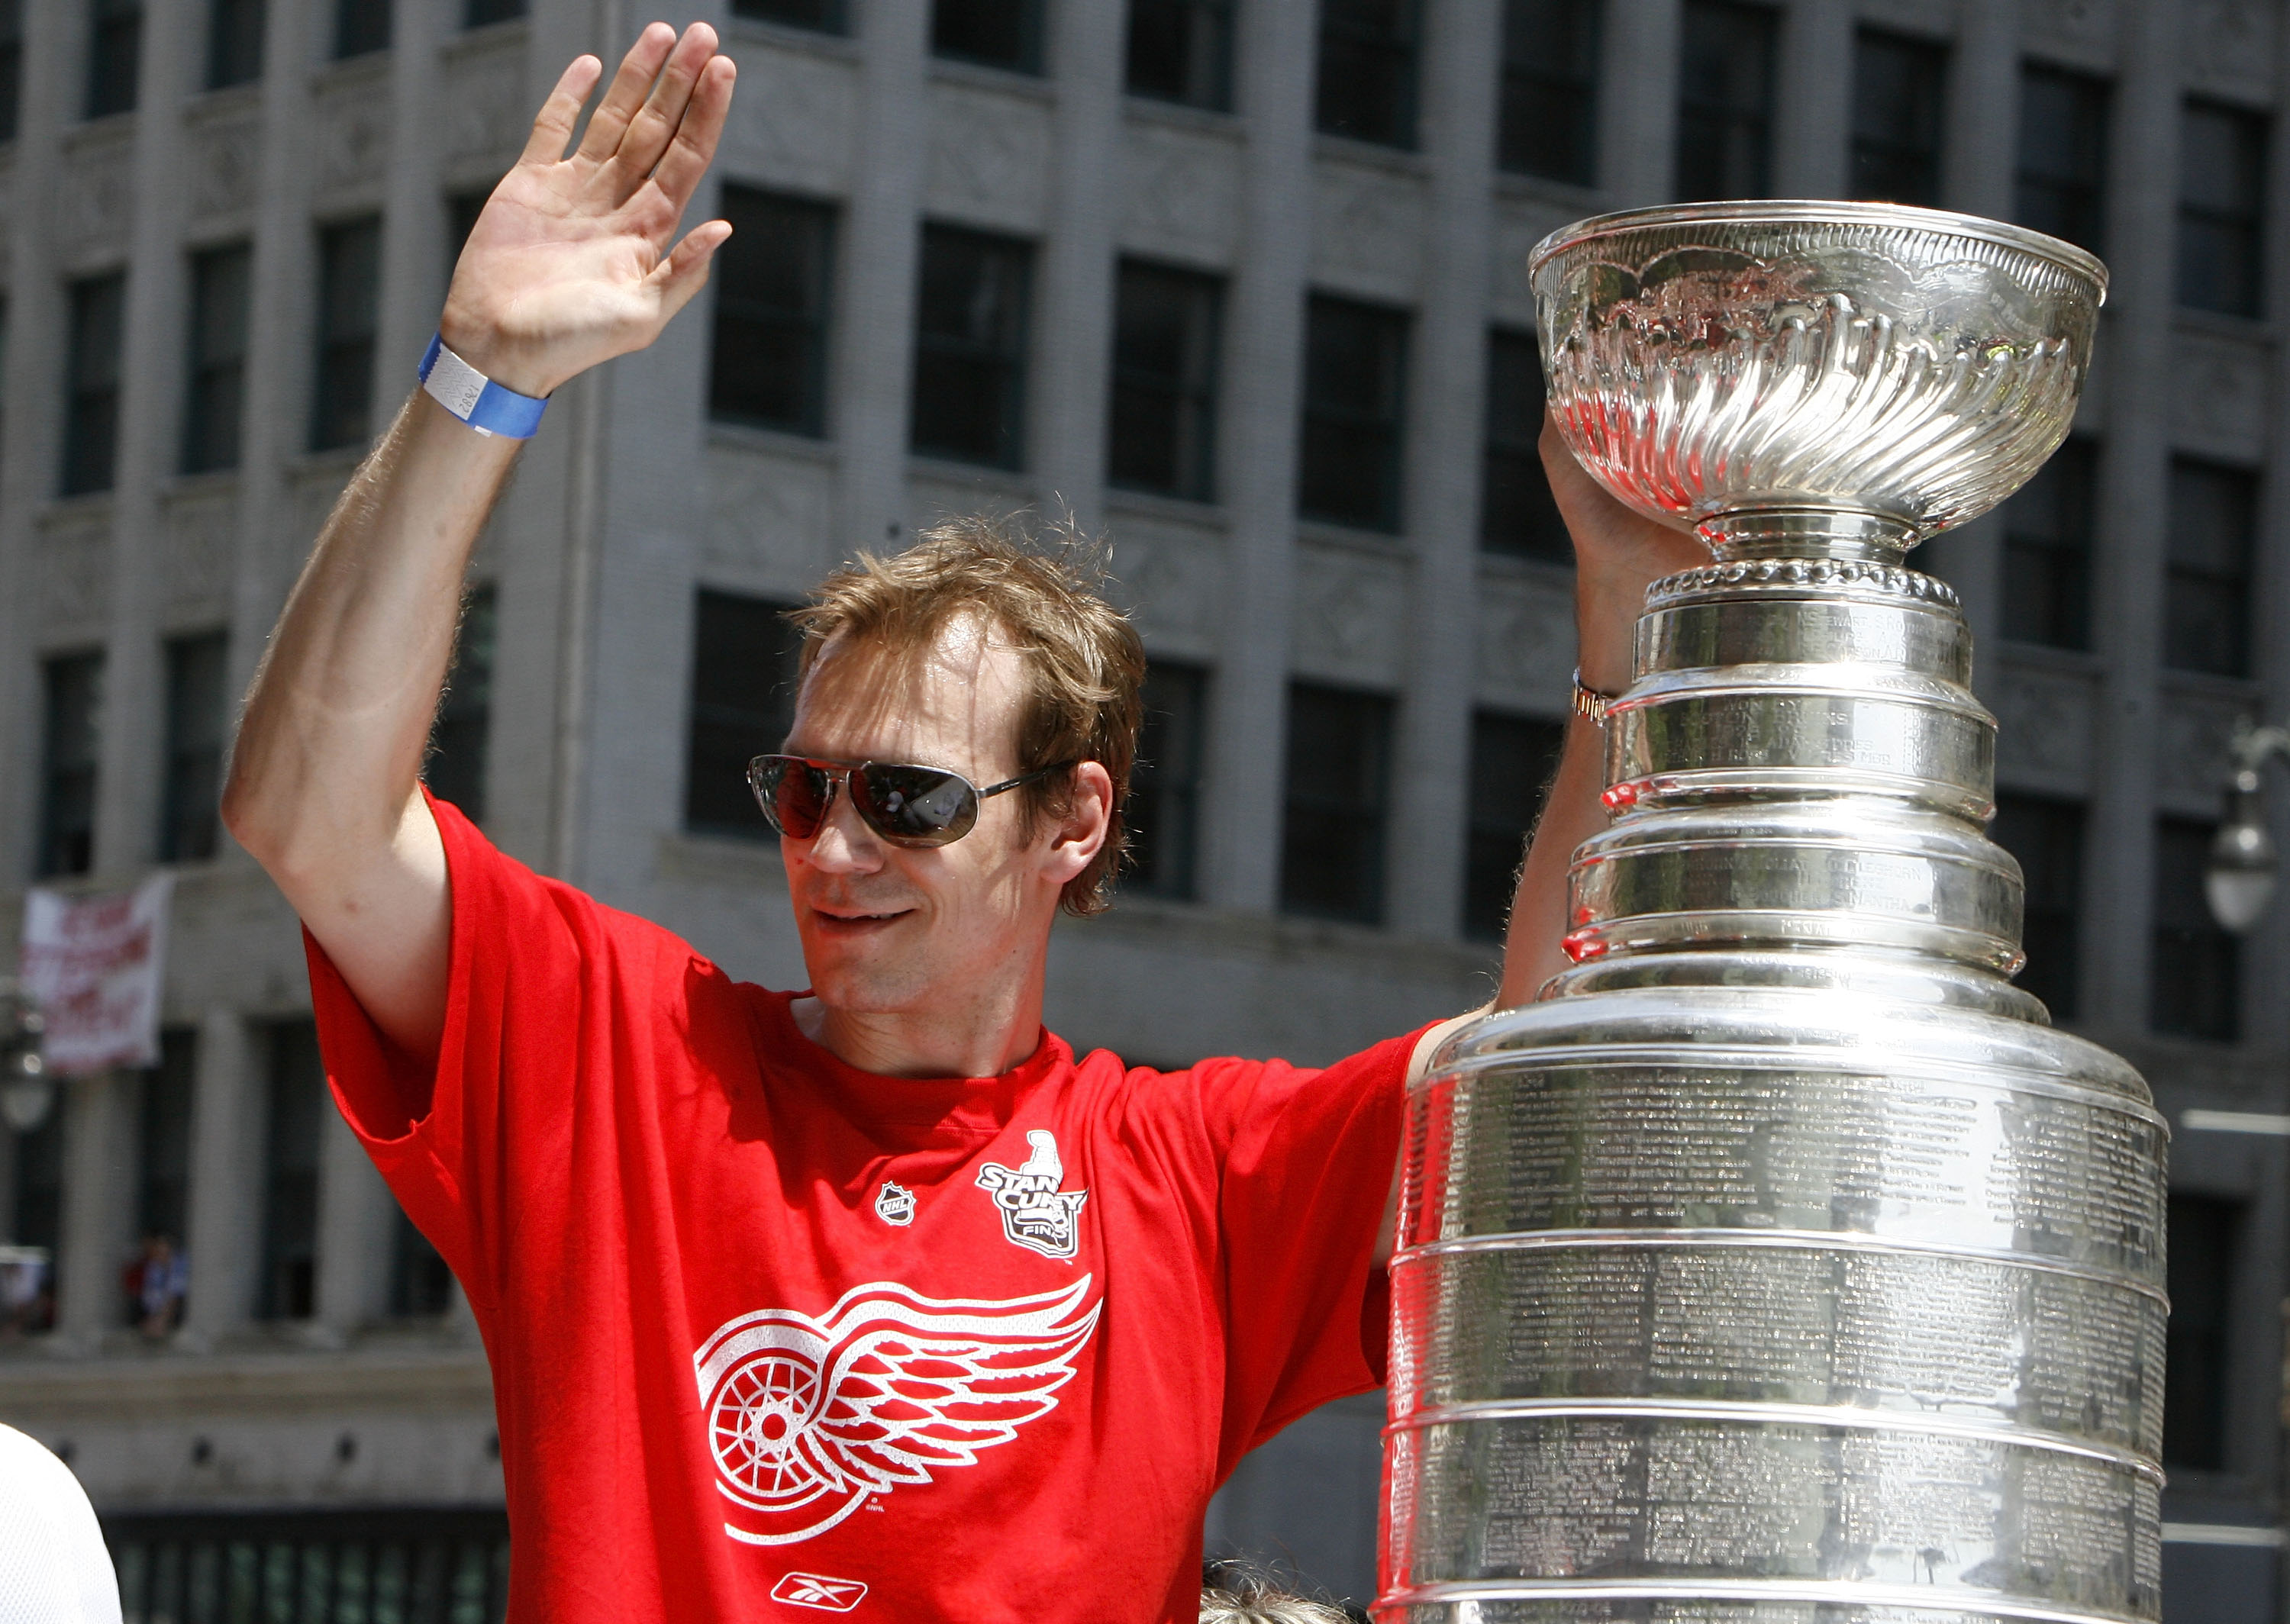 DETROIT - JUNE 06:  Nicklas Lidstrom #5 of the Detroit Red Wings waves to the crowd during a parade to celebrate winning the 2008 Stanley Cup on June 6, 2008 in Detroit, Michigan.  (Photo by Gregory Shamus/Getty Images)